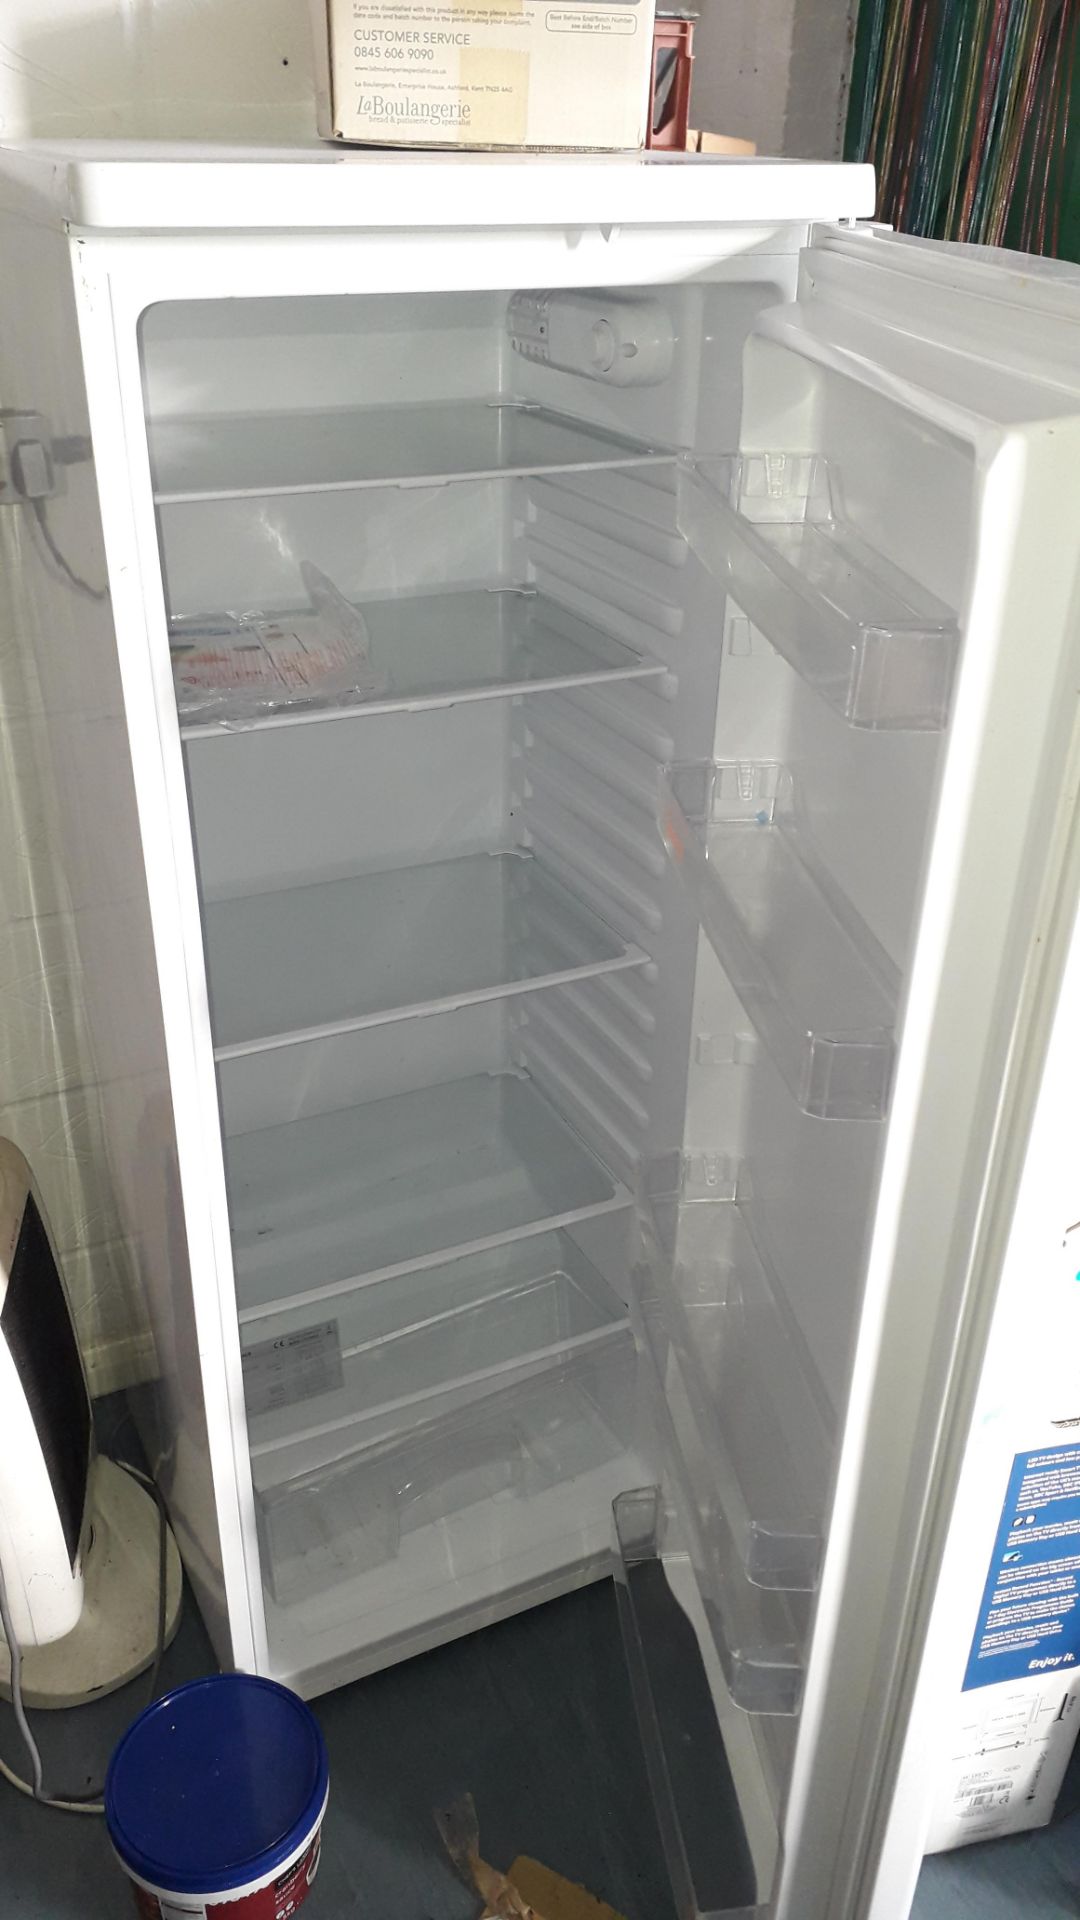 Essentials CTL55W18 240Ltr Upright Refrigerator 1450 x 550 and Zanussi DX6453 Dishwasher. Located at - Image 2 of 5